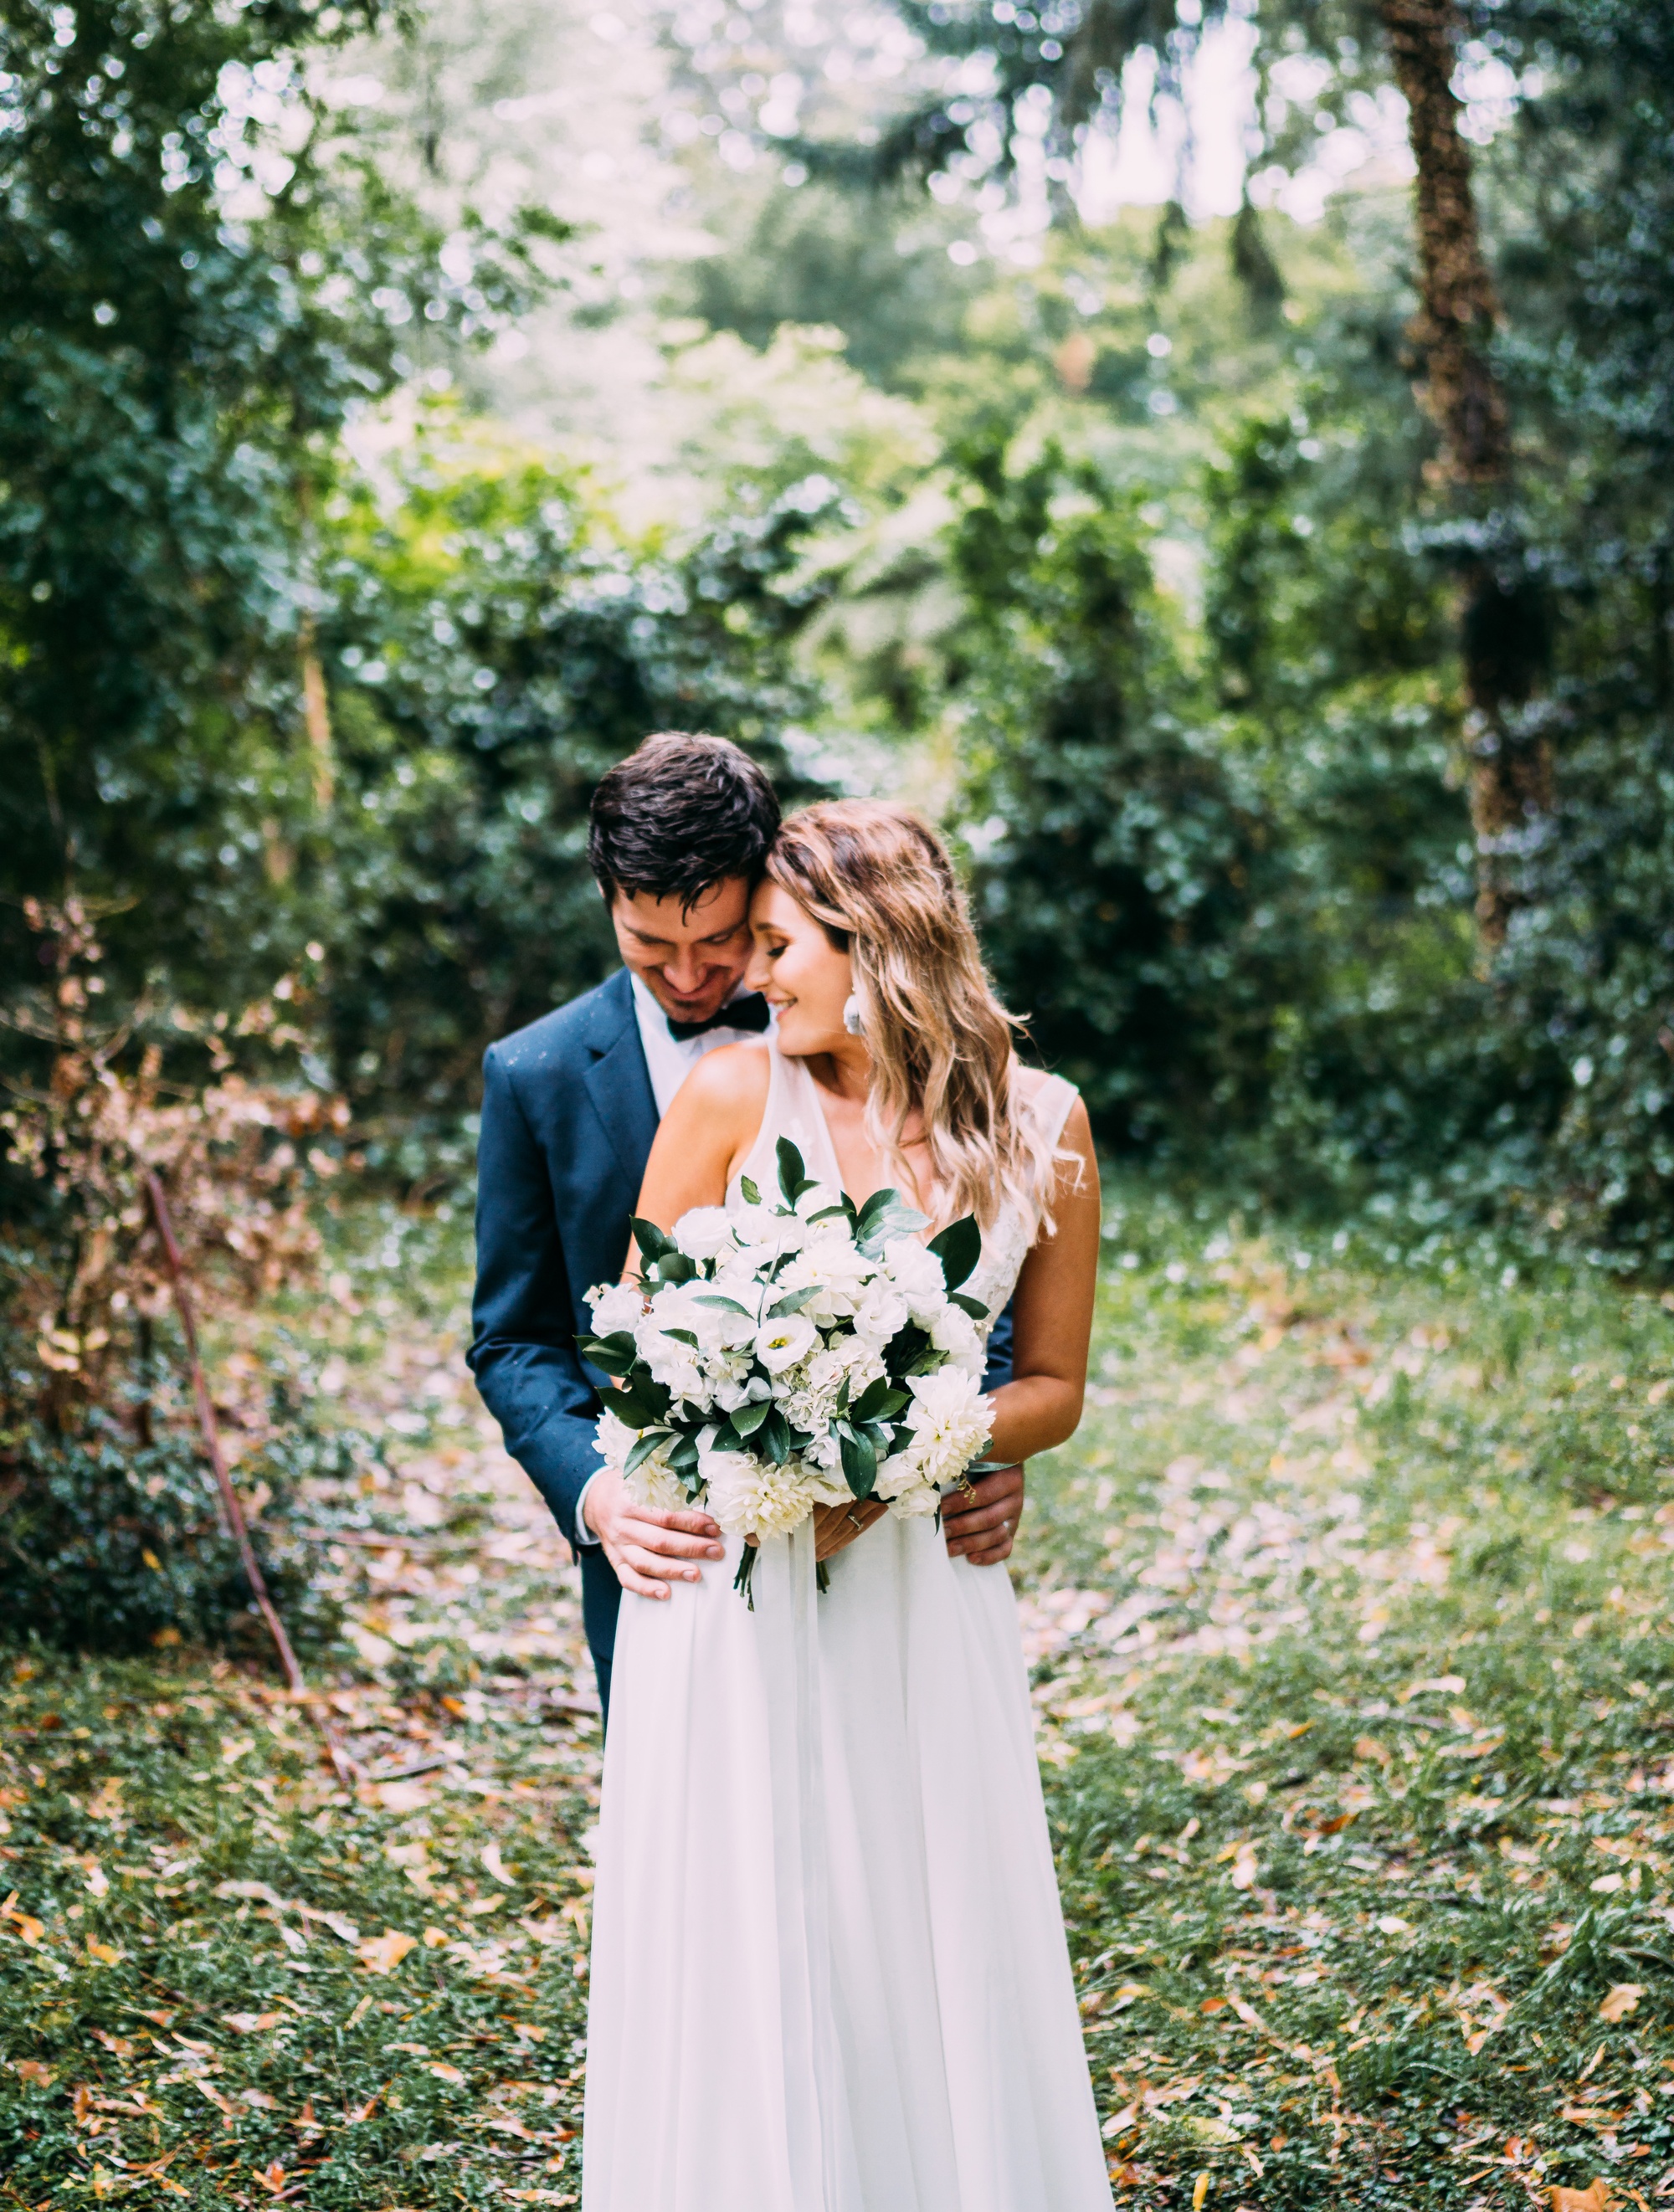 gorgeous wedding couple photo in the forest